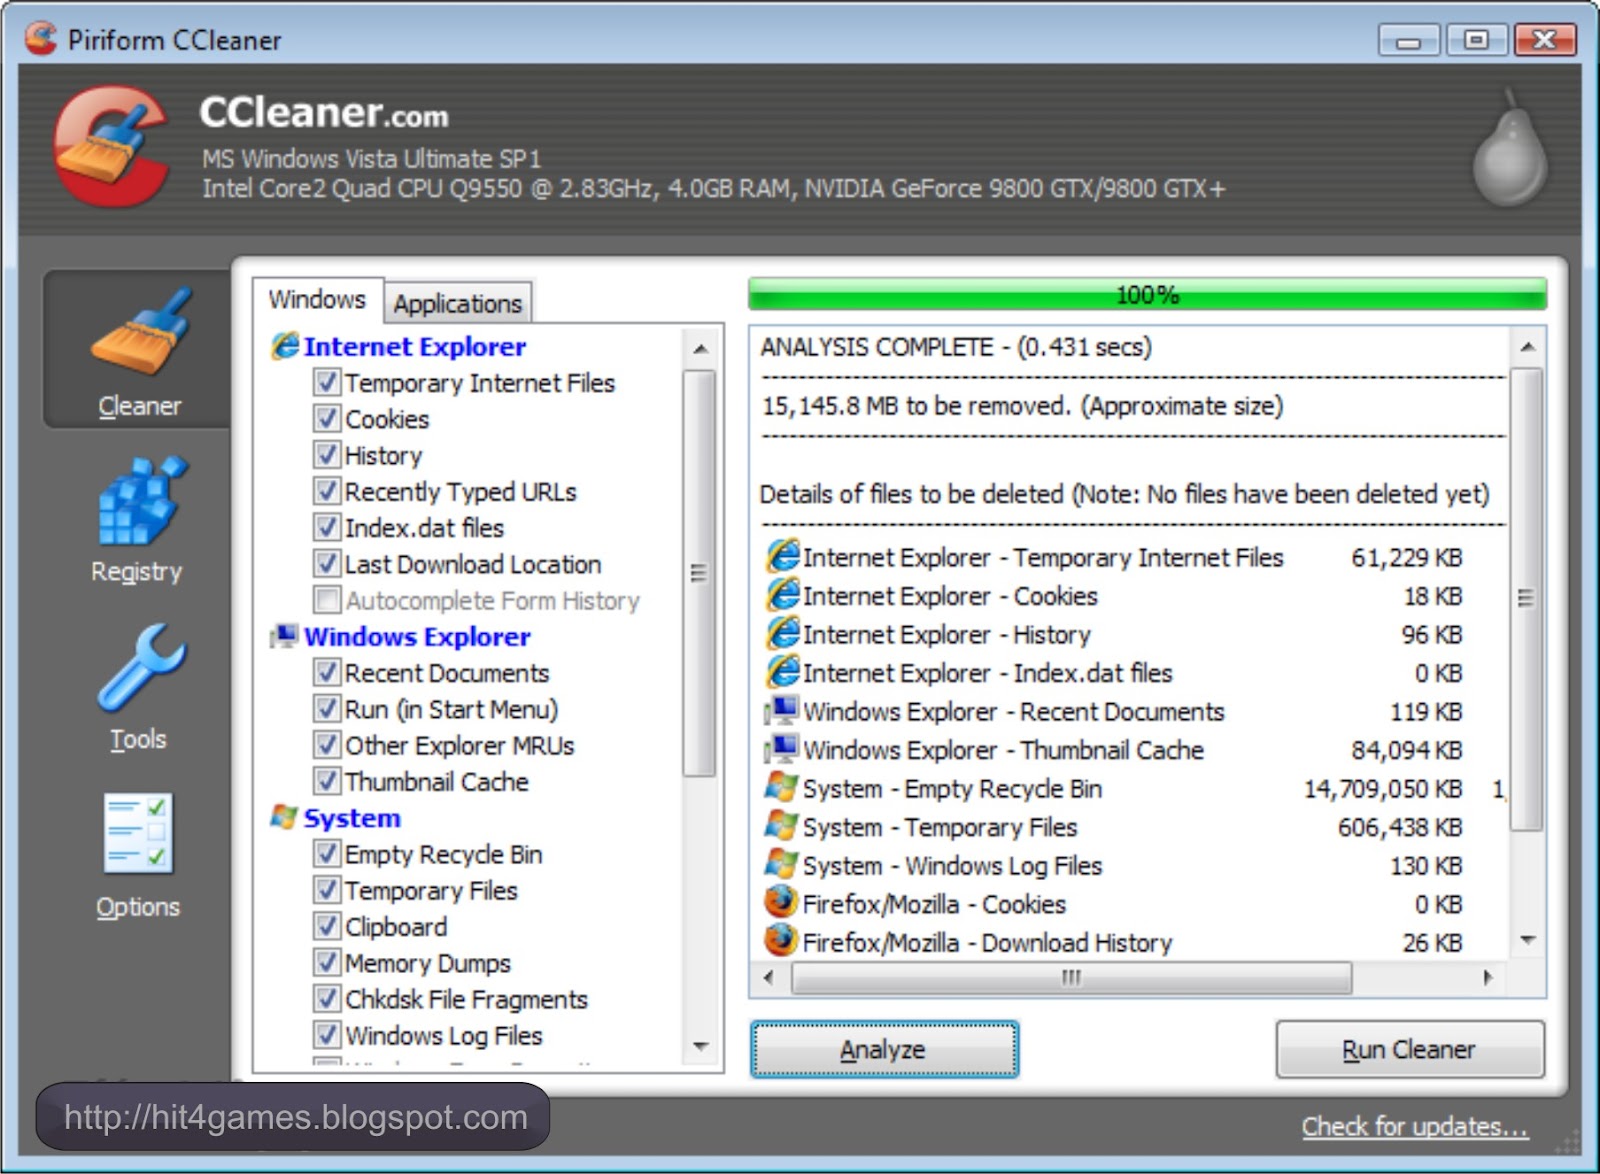 Ccleaner automatically deletes files go for windows - Adobe flash player ccleaner free download windows 7 full nights freddys